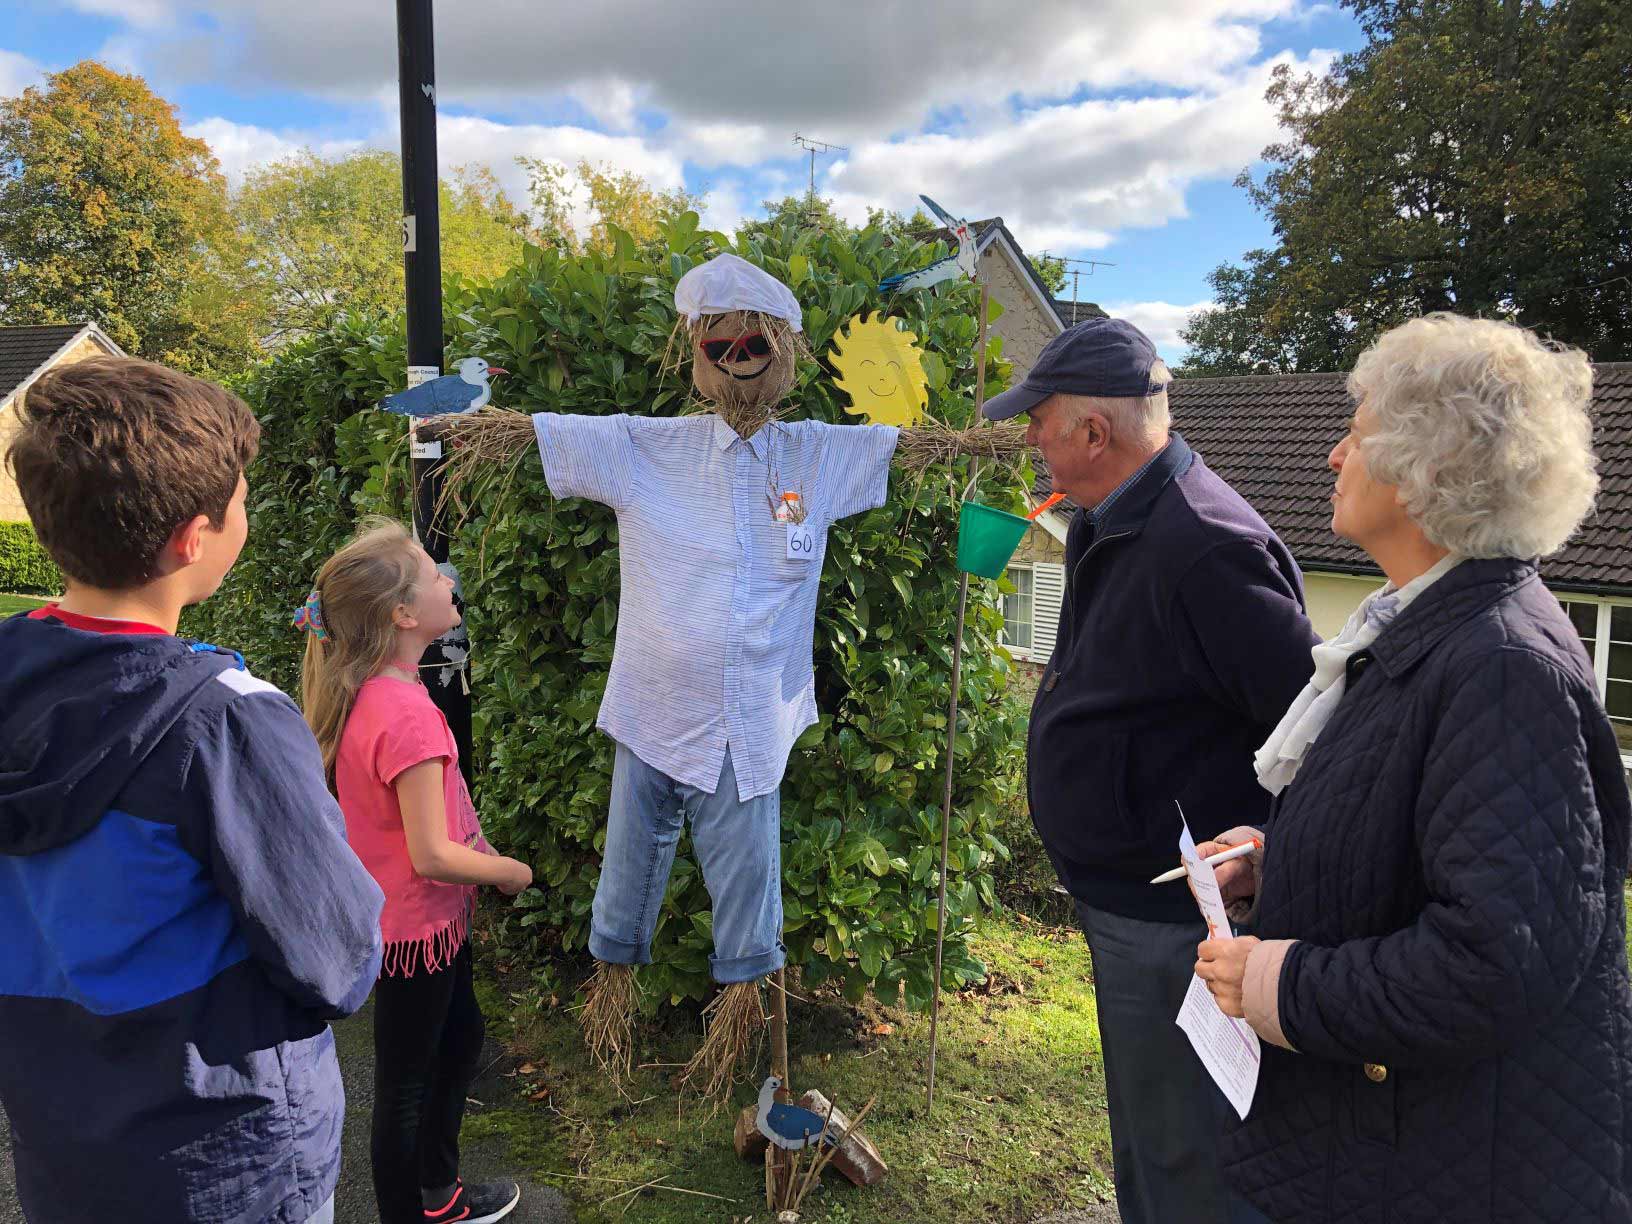 Scarecrows raise over £1400 for the Harrogate and District Food Bank